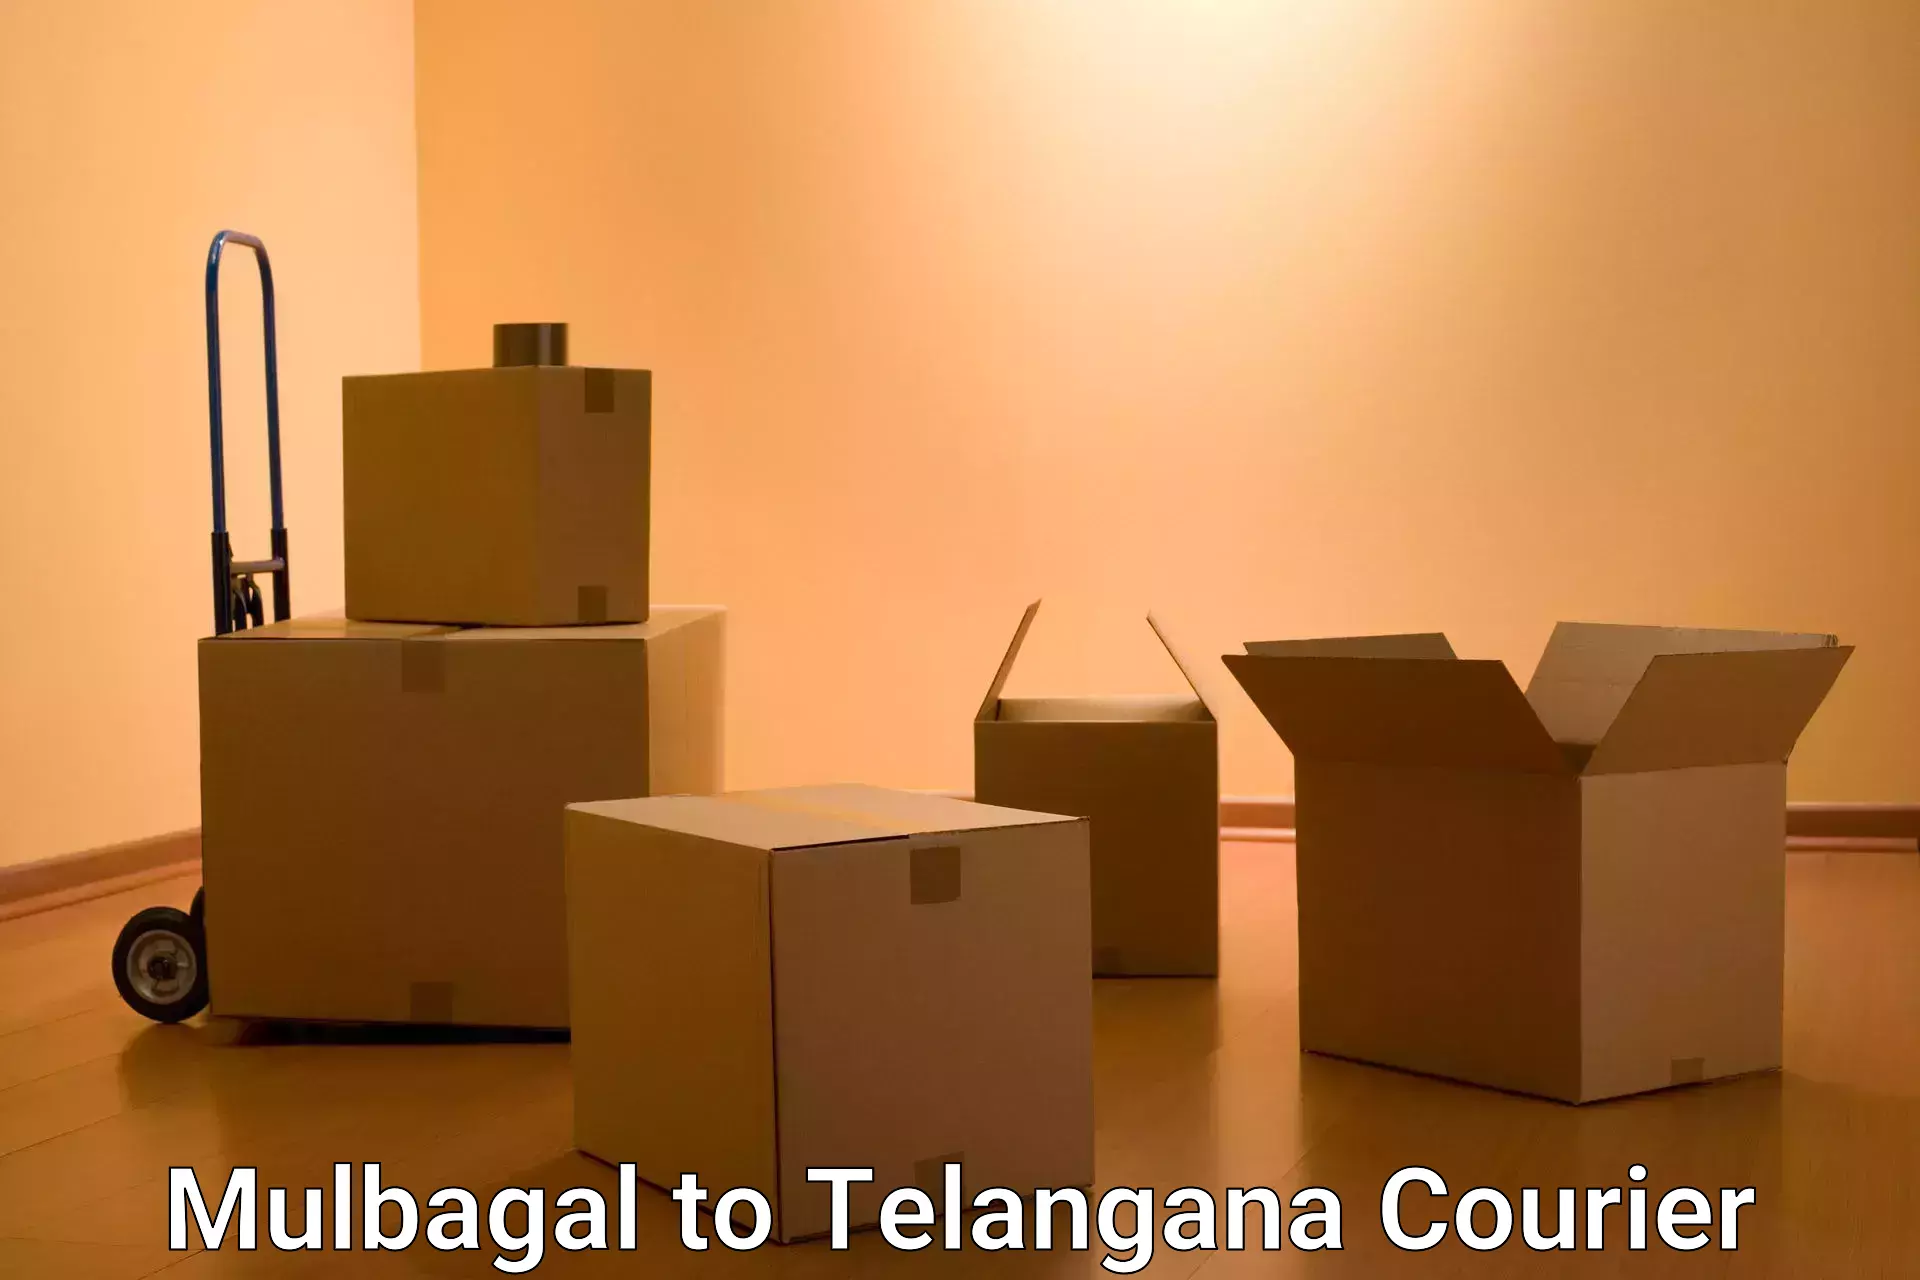 Courier service innovation Mulbagal to Peddapalli